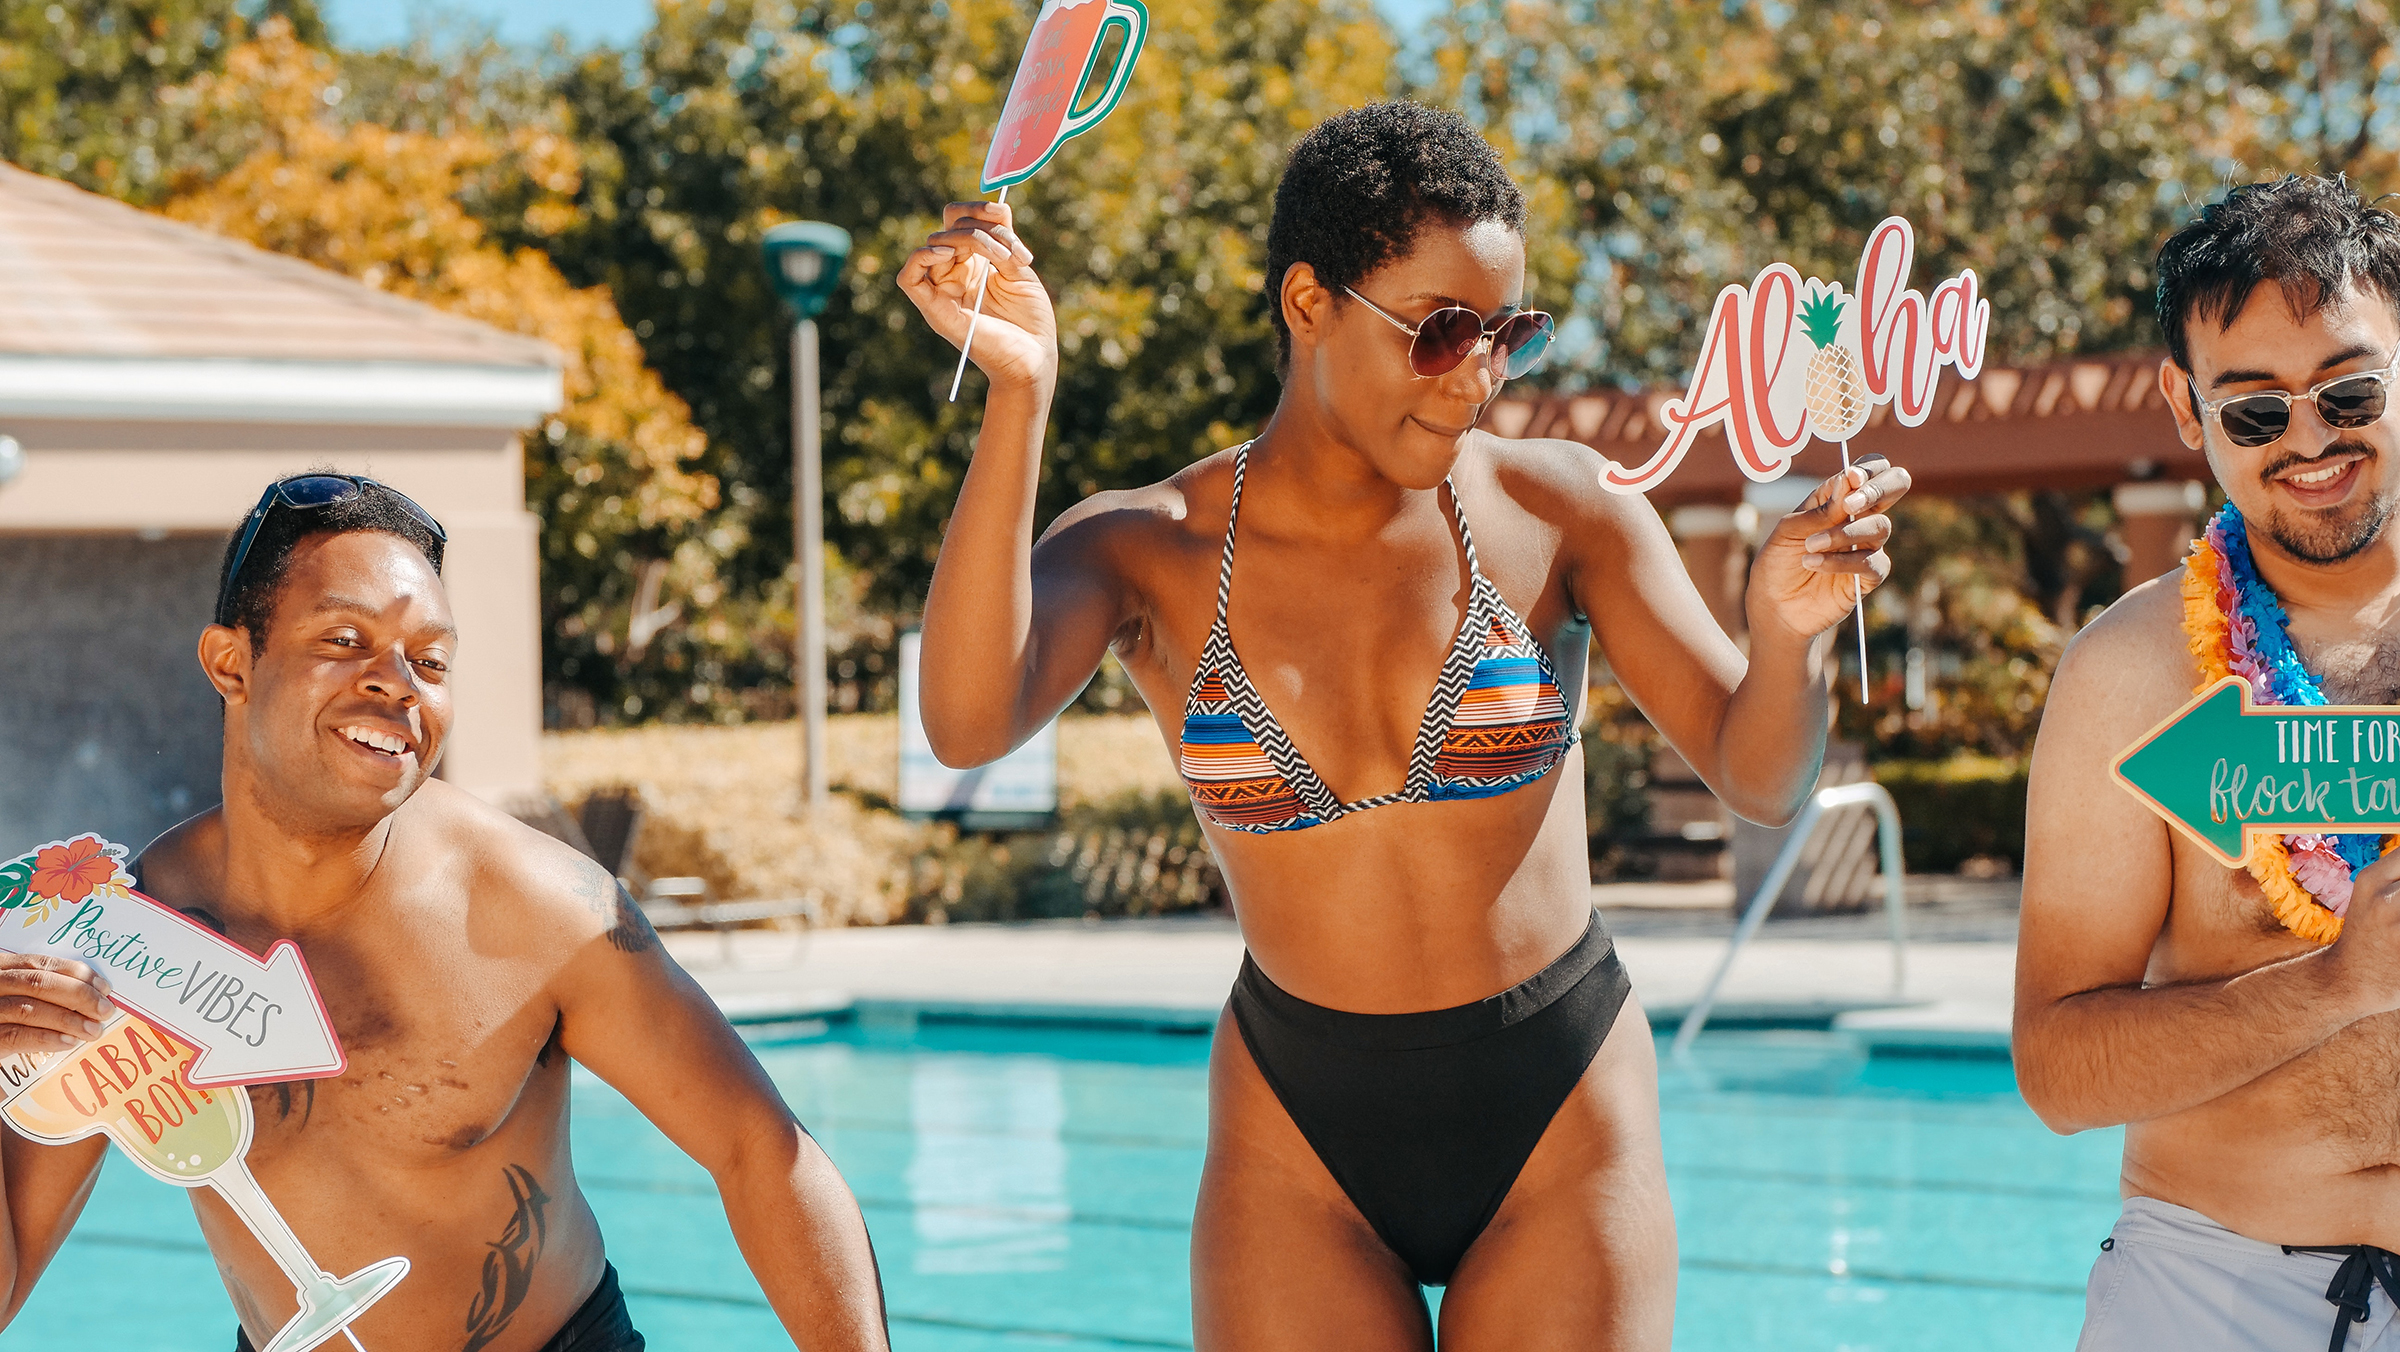 Getting Ready For Swimsuit Season: 4 Quick Tips on How to Get Yourself Ready For an Amazing Summer